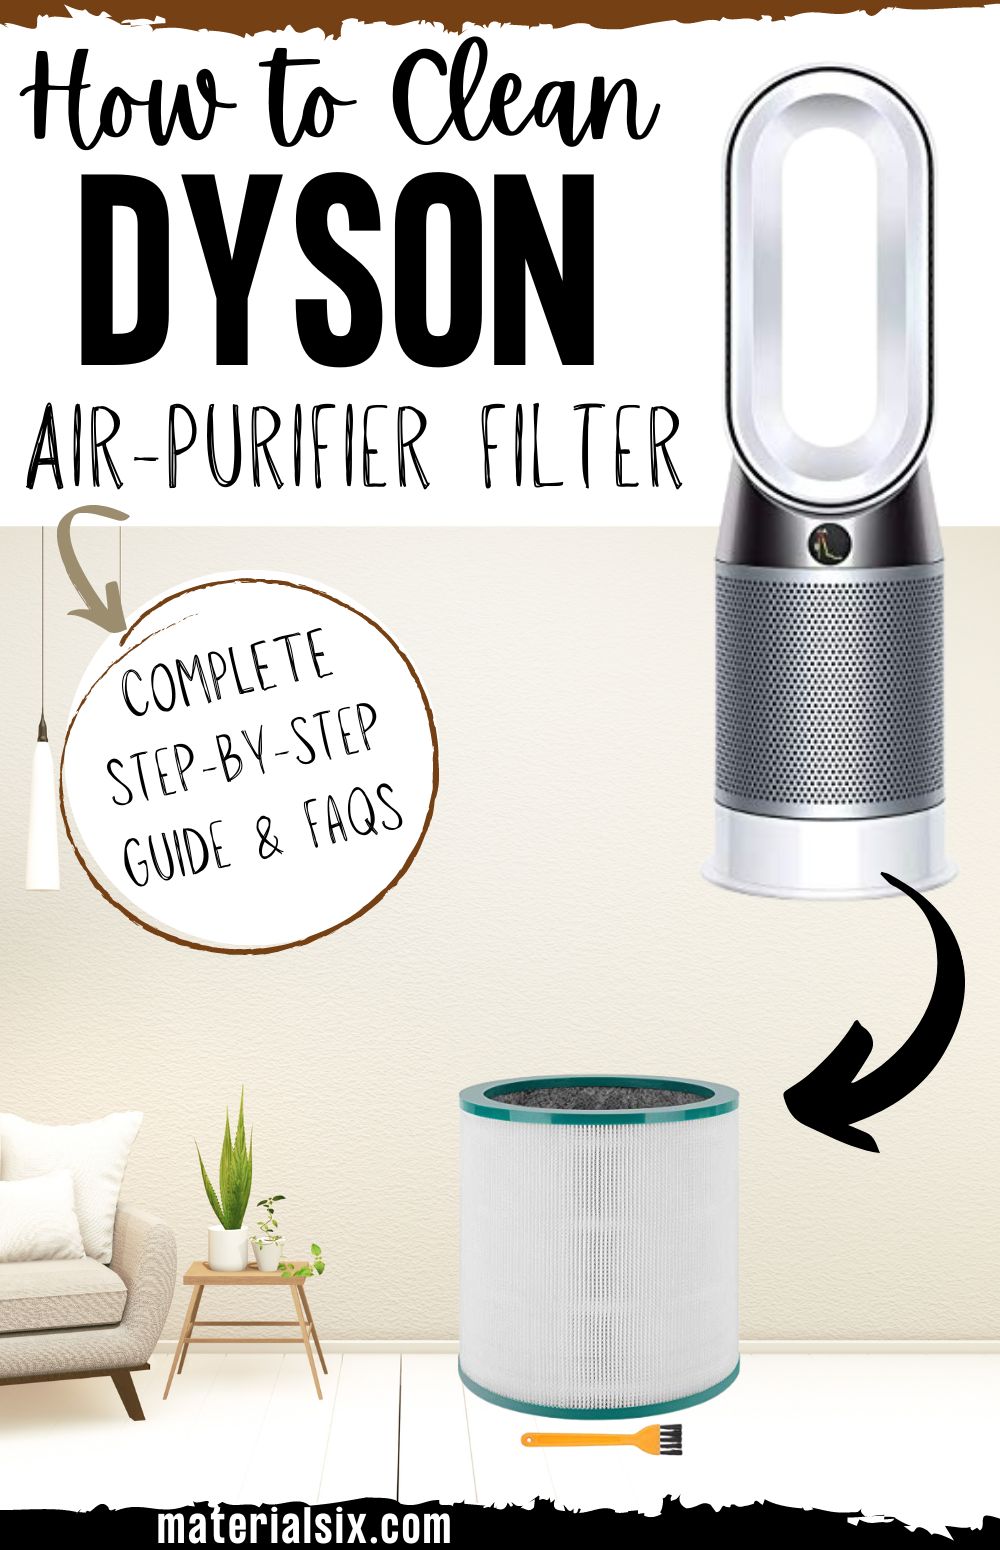 How to Clean Your Dyson Air Purifier Filter (Complete Guide)